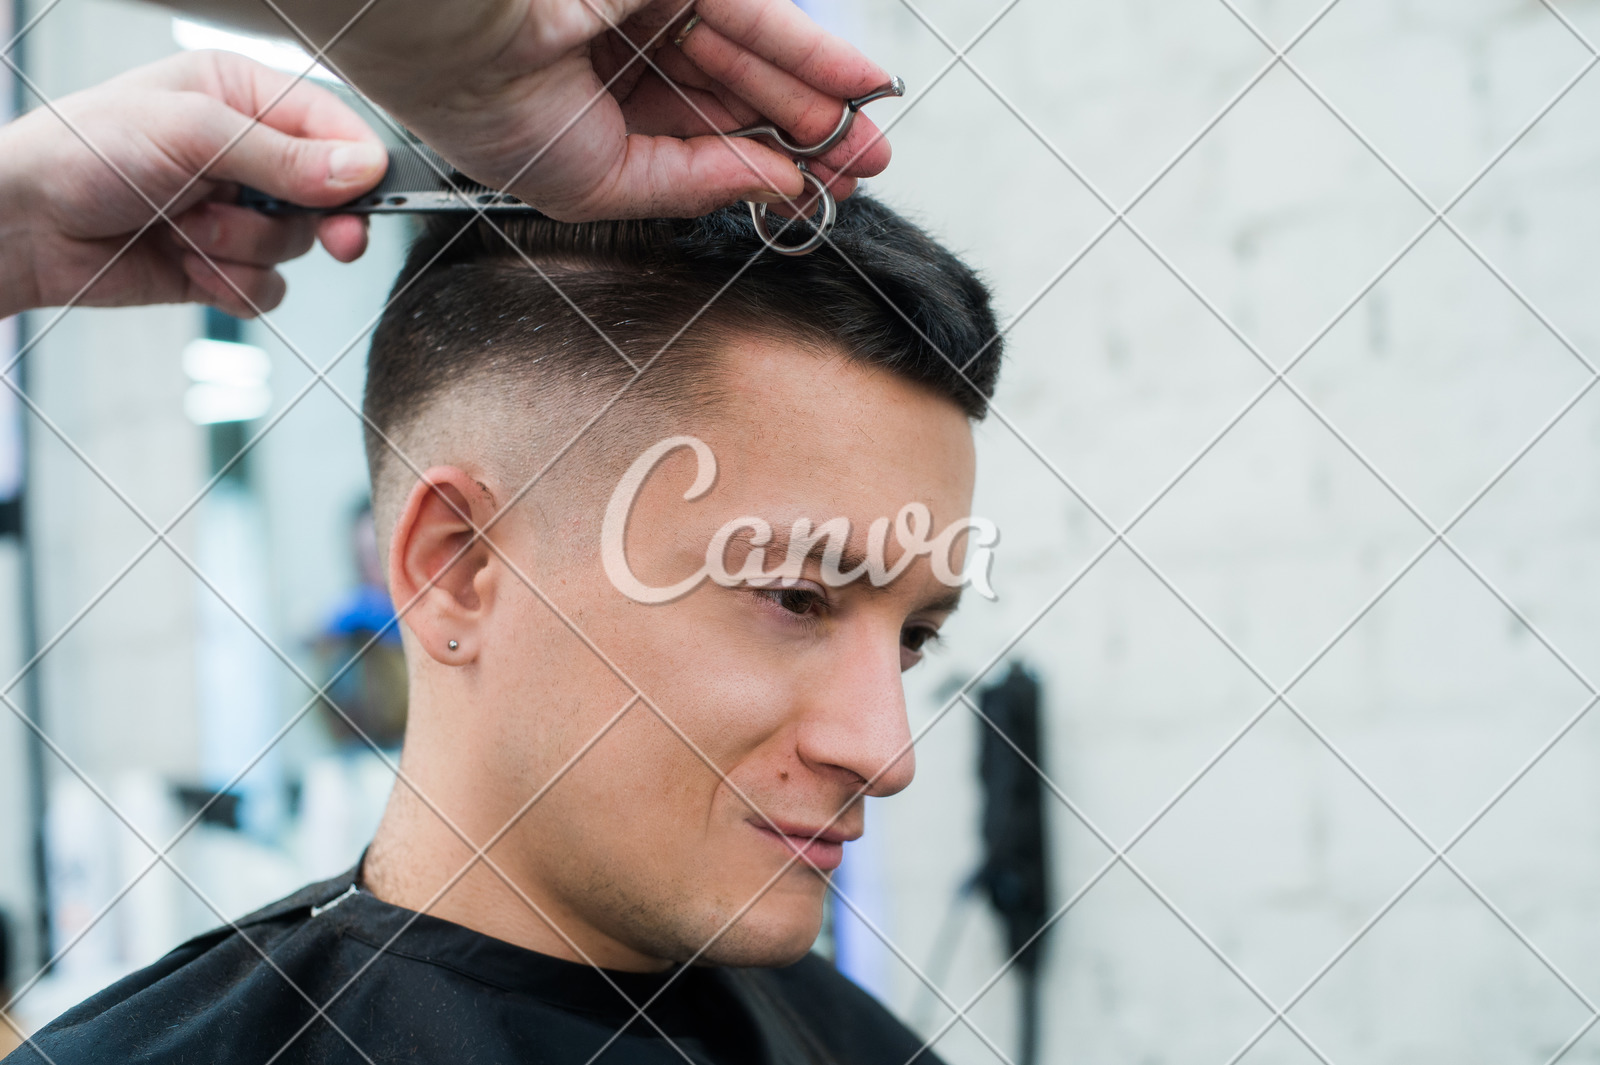 Male Barber Giving Client Haircut In Shop Photos By Canva